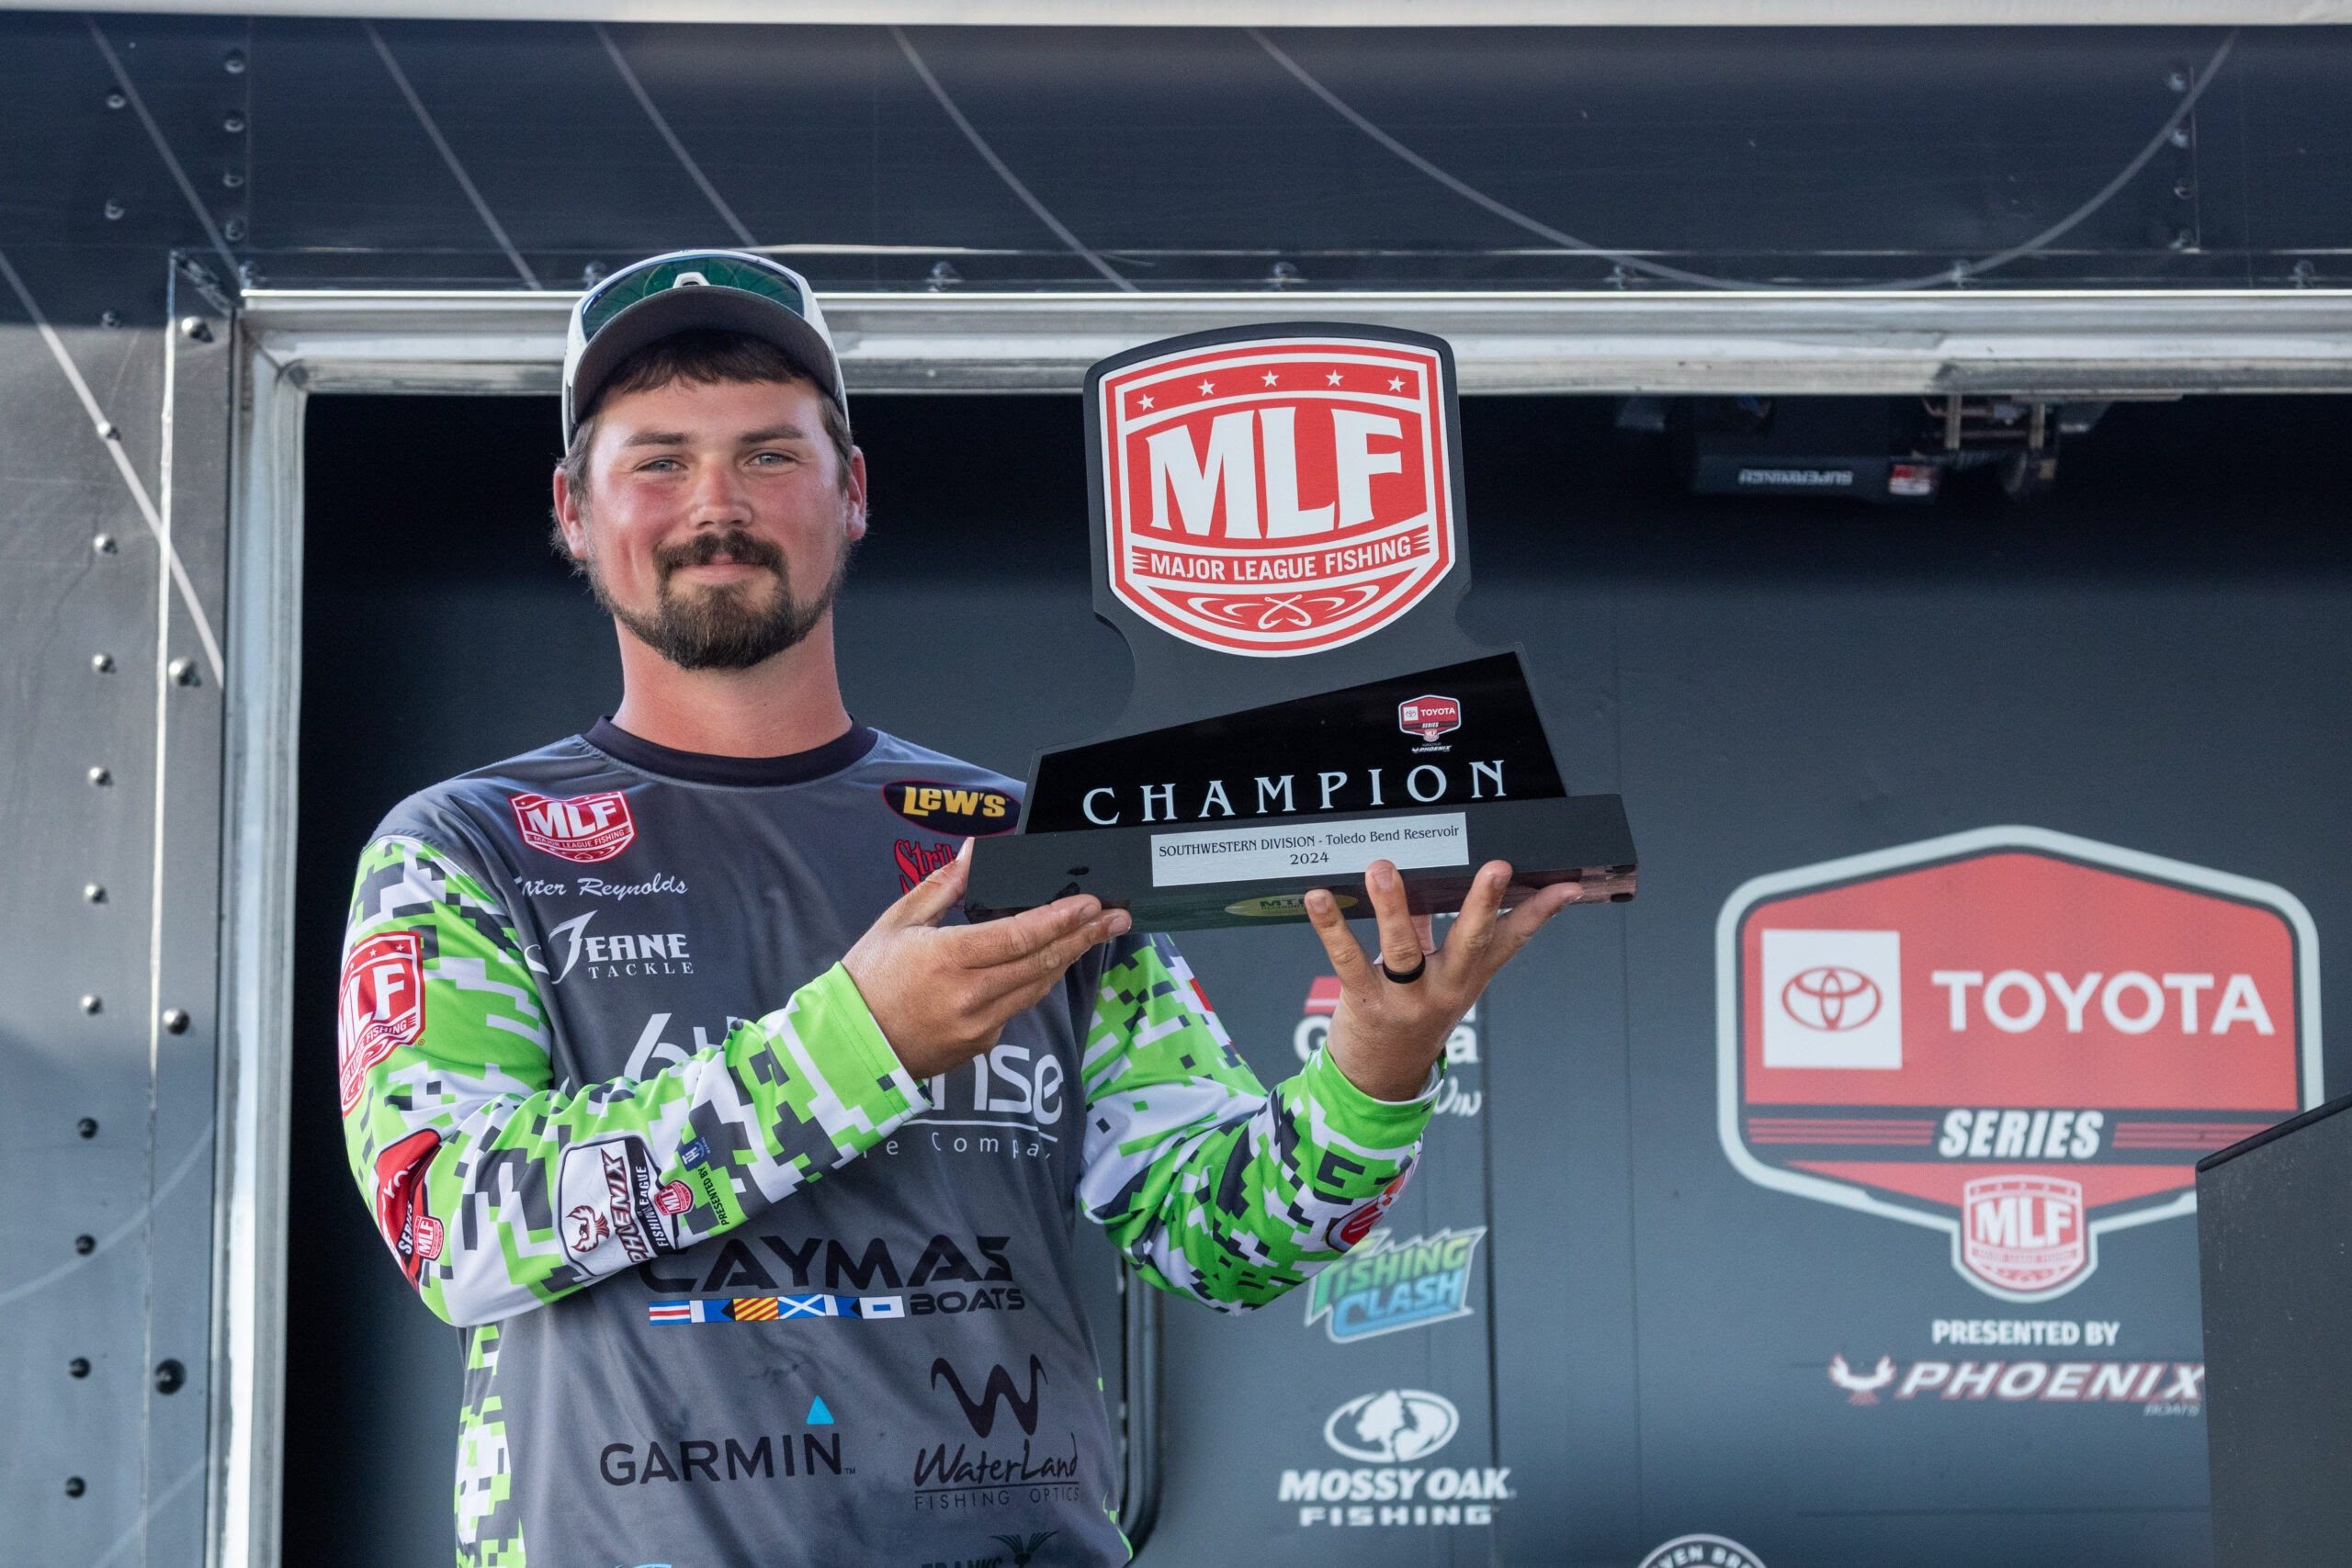 Tater Reynolds Goes Wire-to-Wire, Wins MLF Toyota Series at Toledo Bend Reservoir